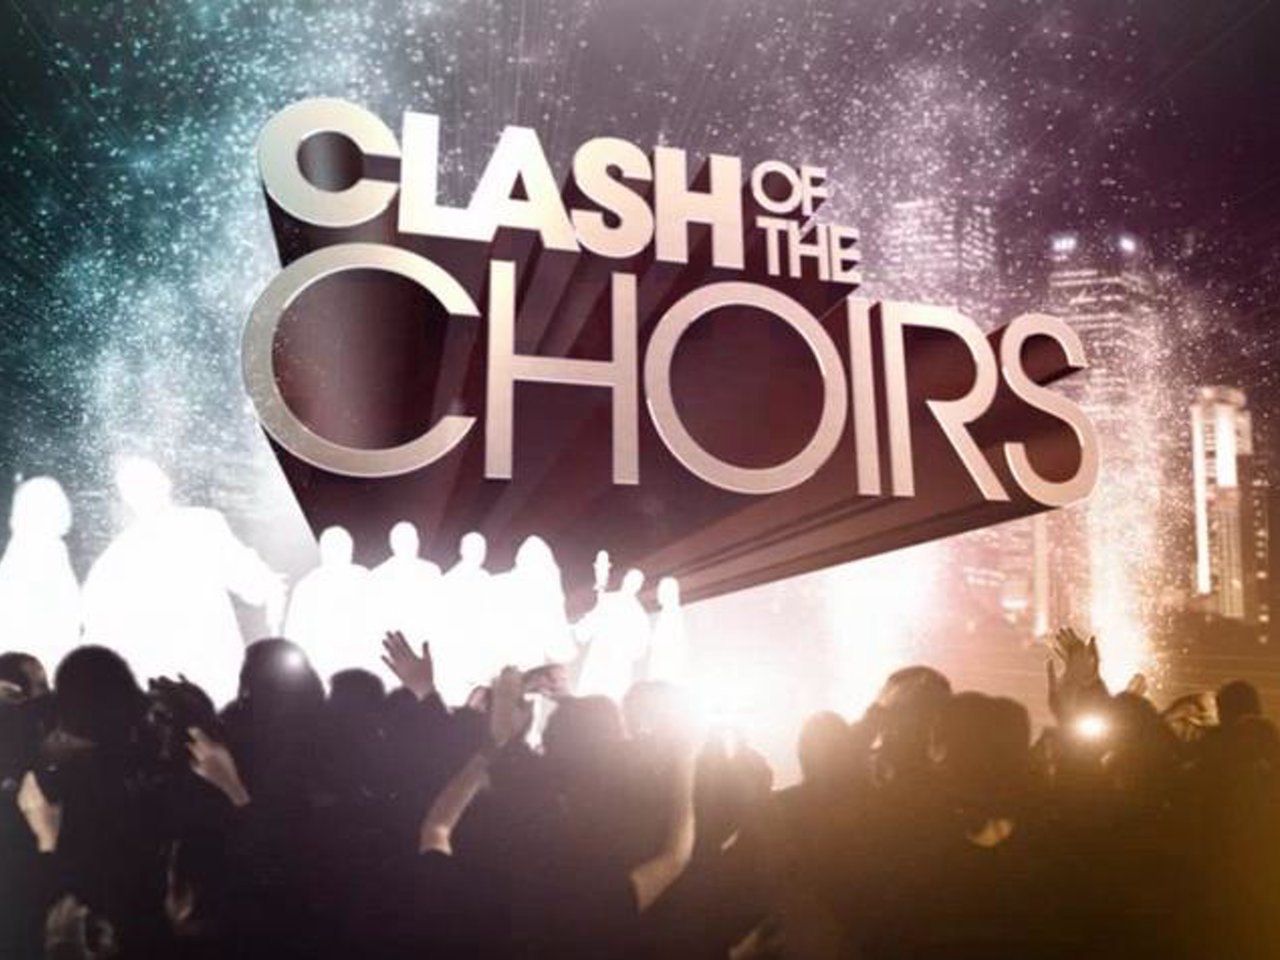 Clash Of The Choirs